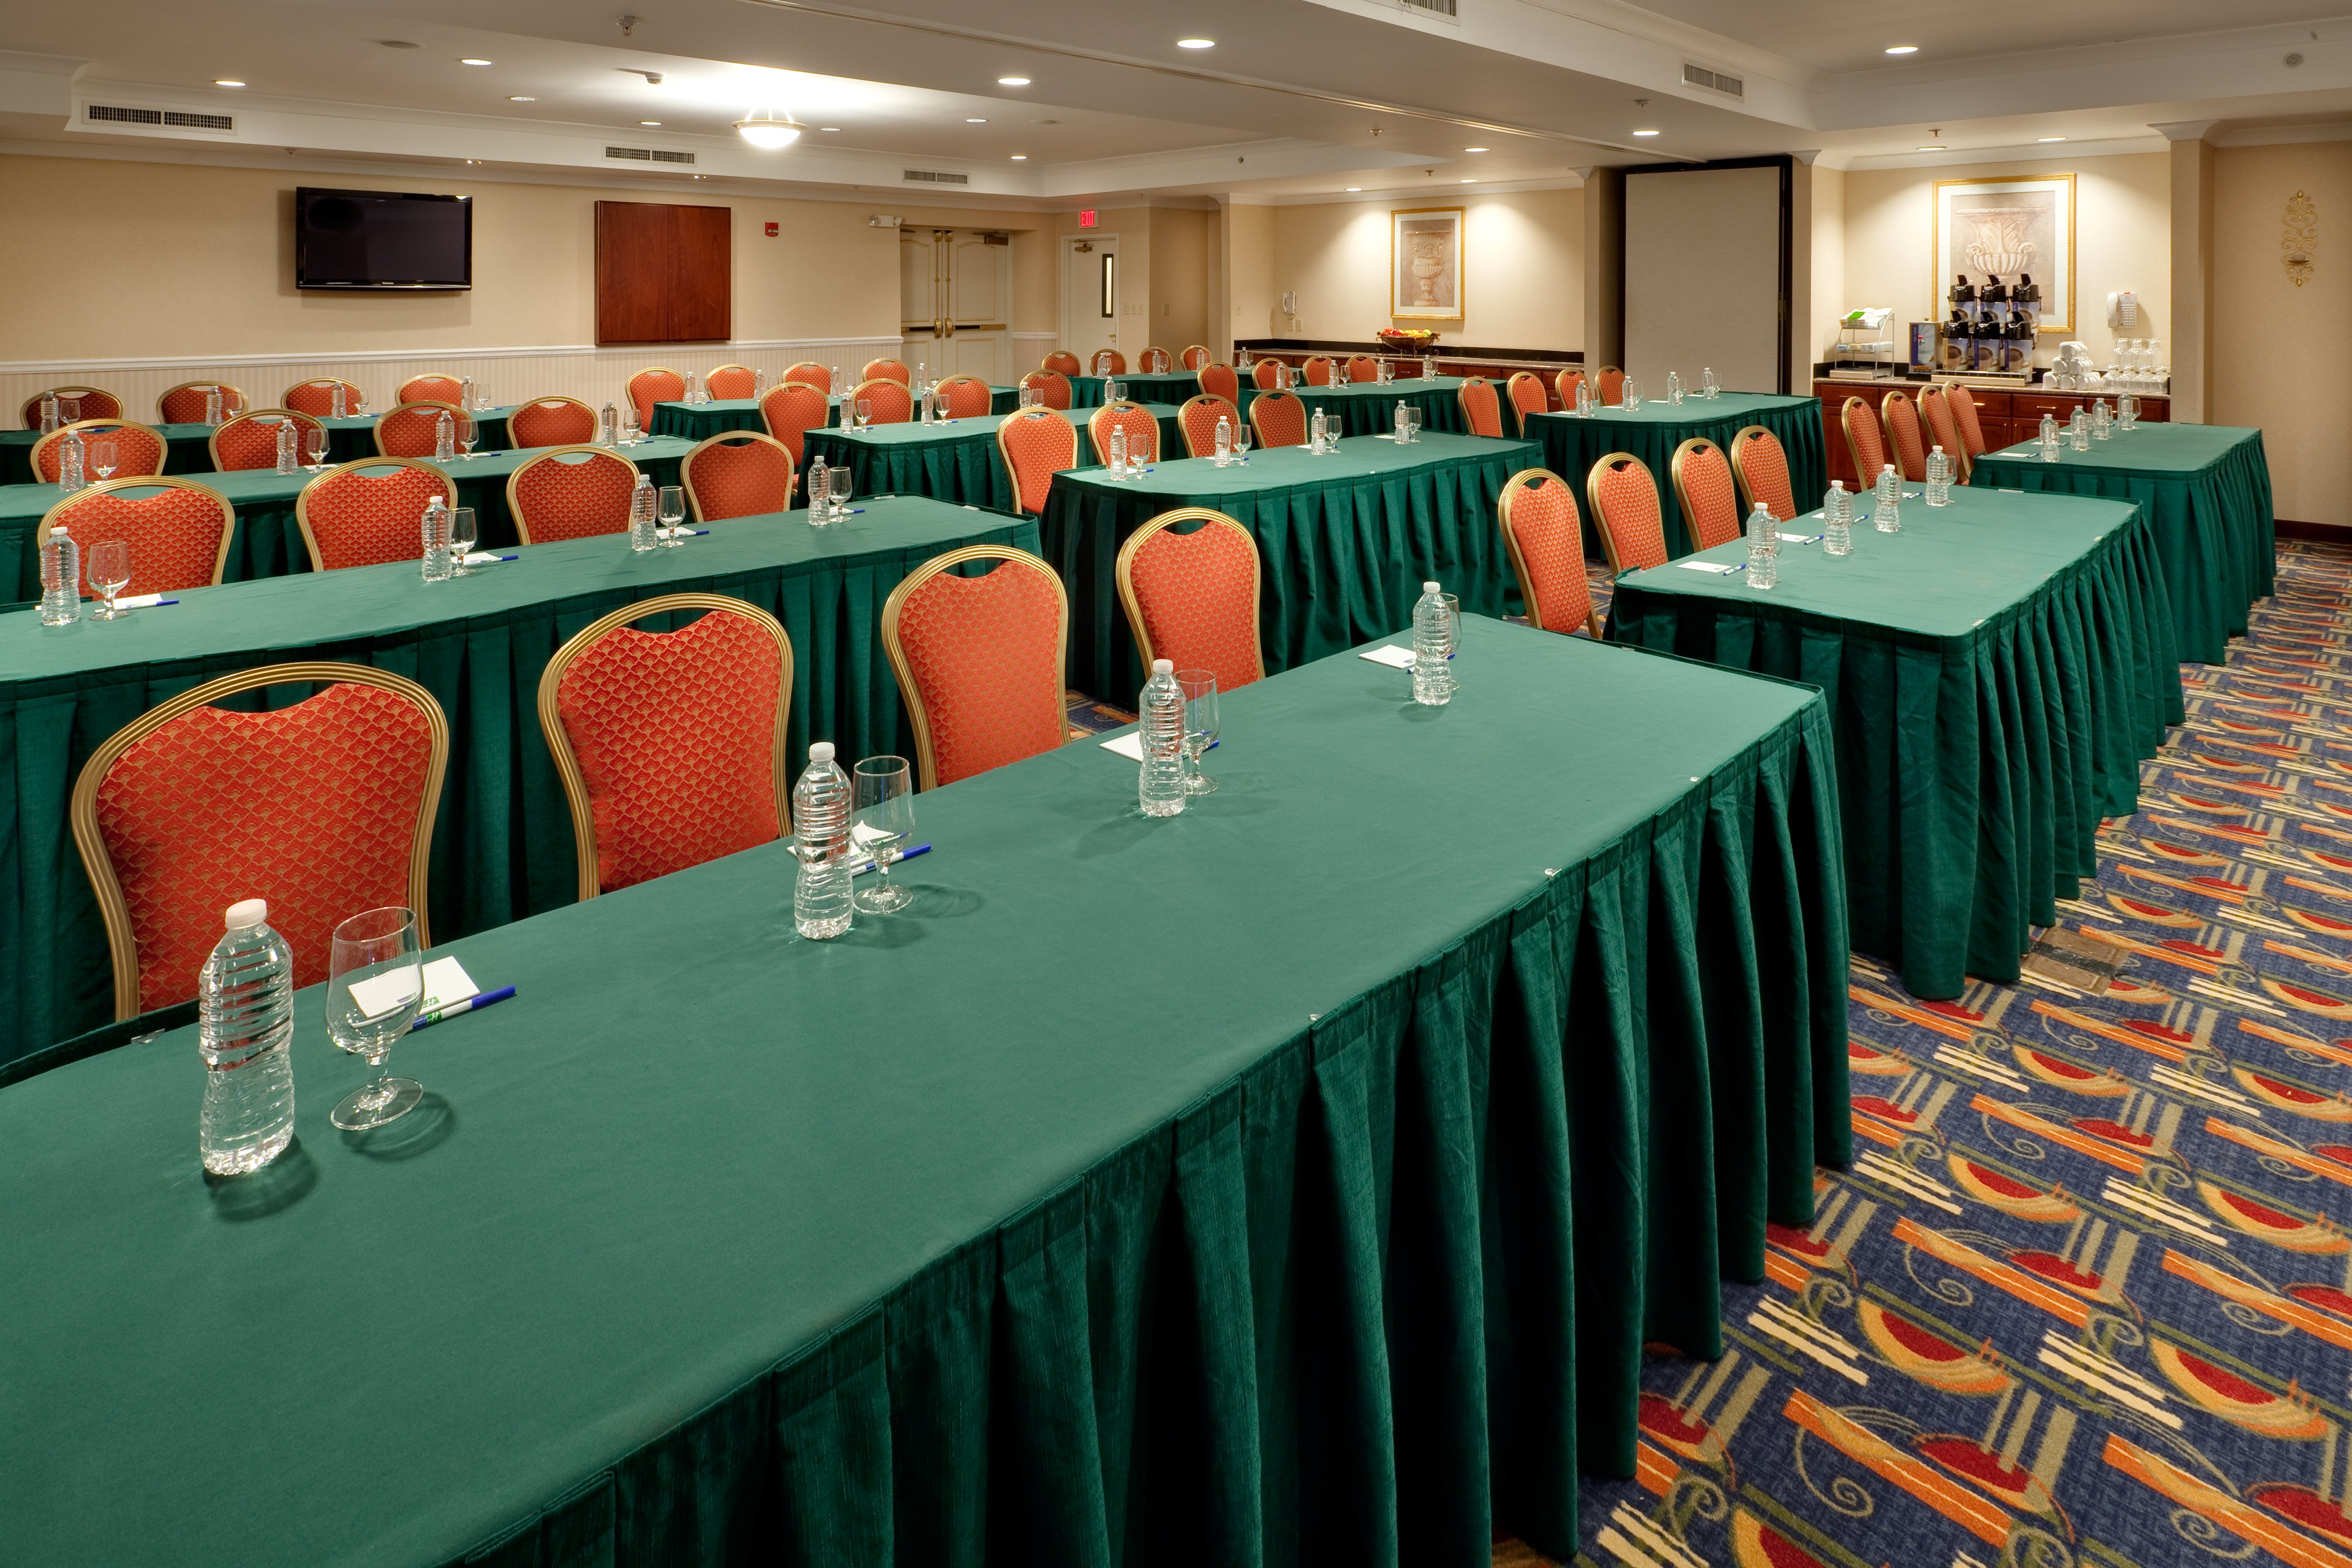 Perfect place for your next professional meeting